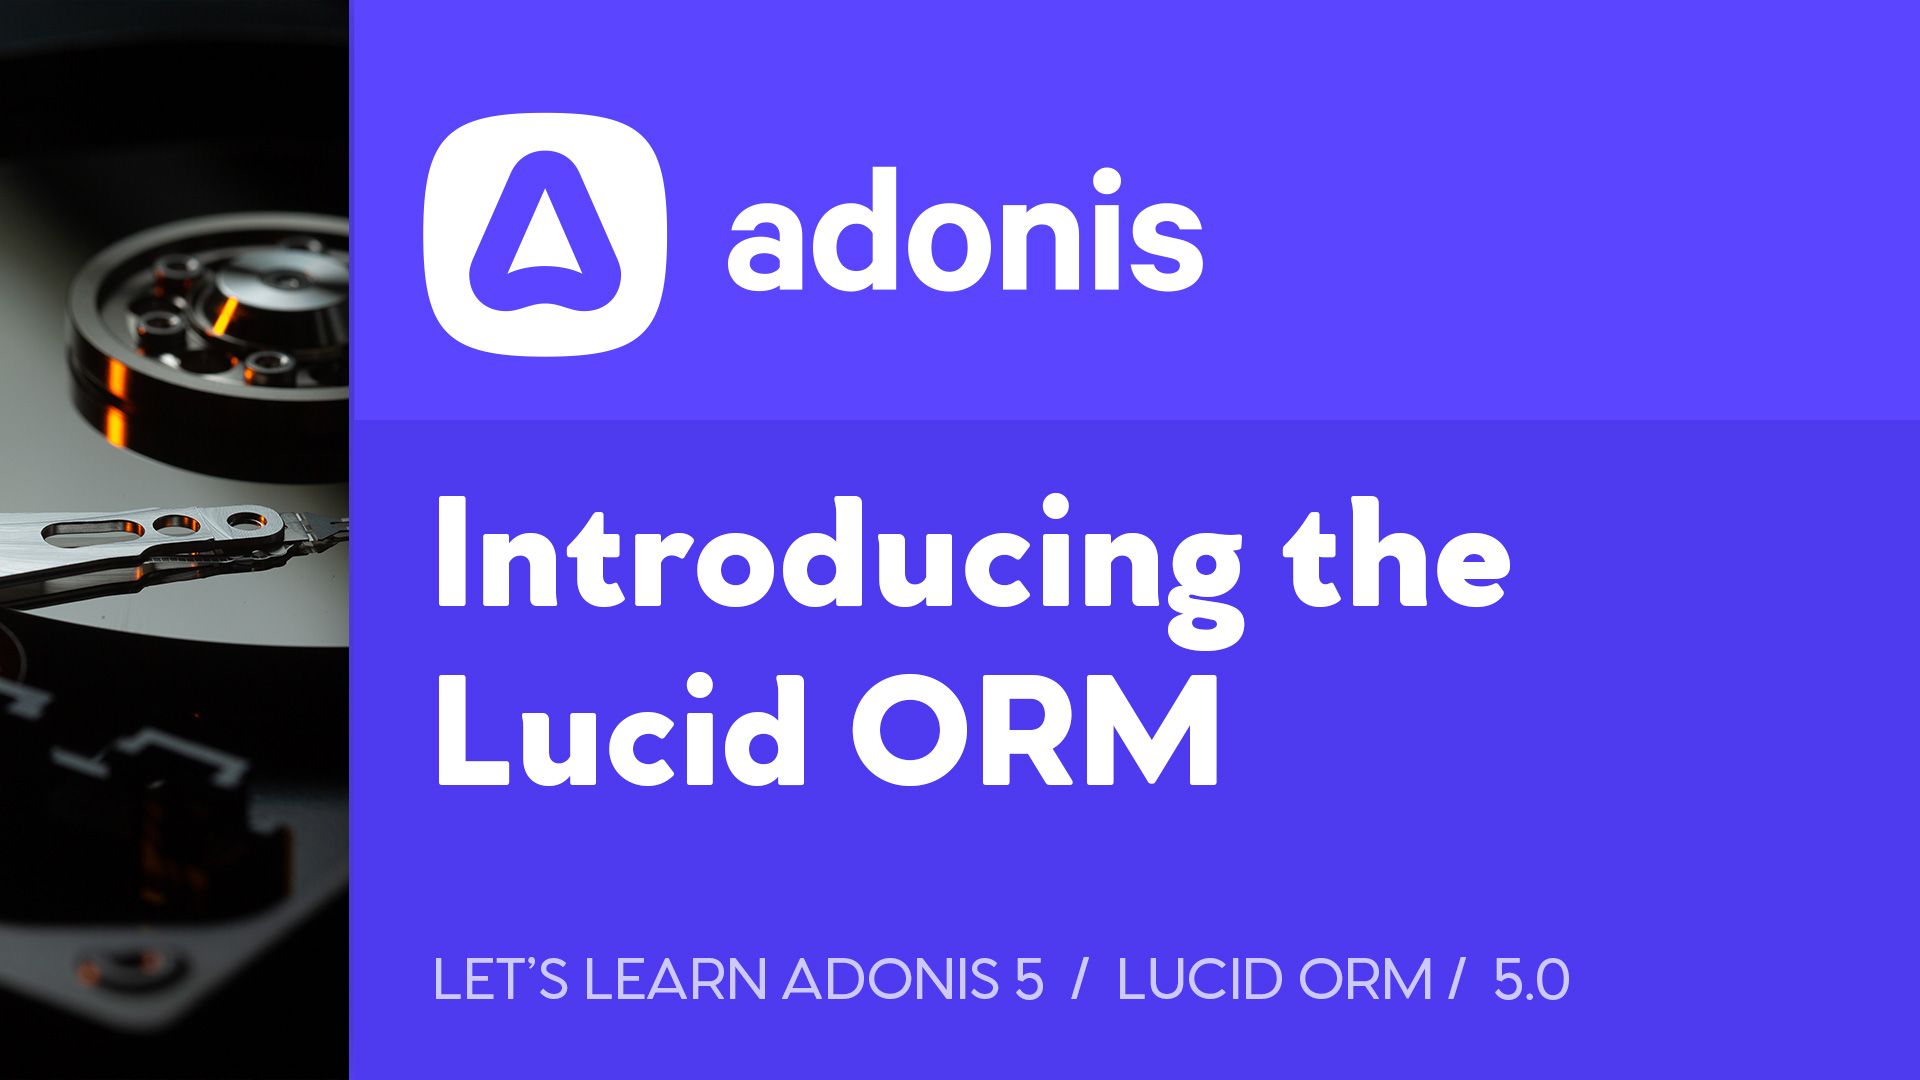 Introducing the Lucid ORM